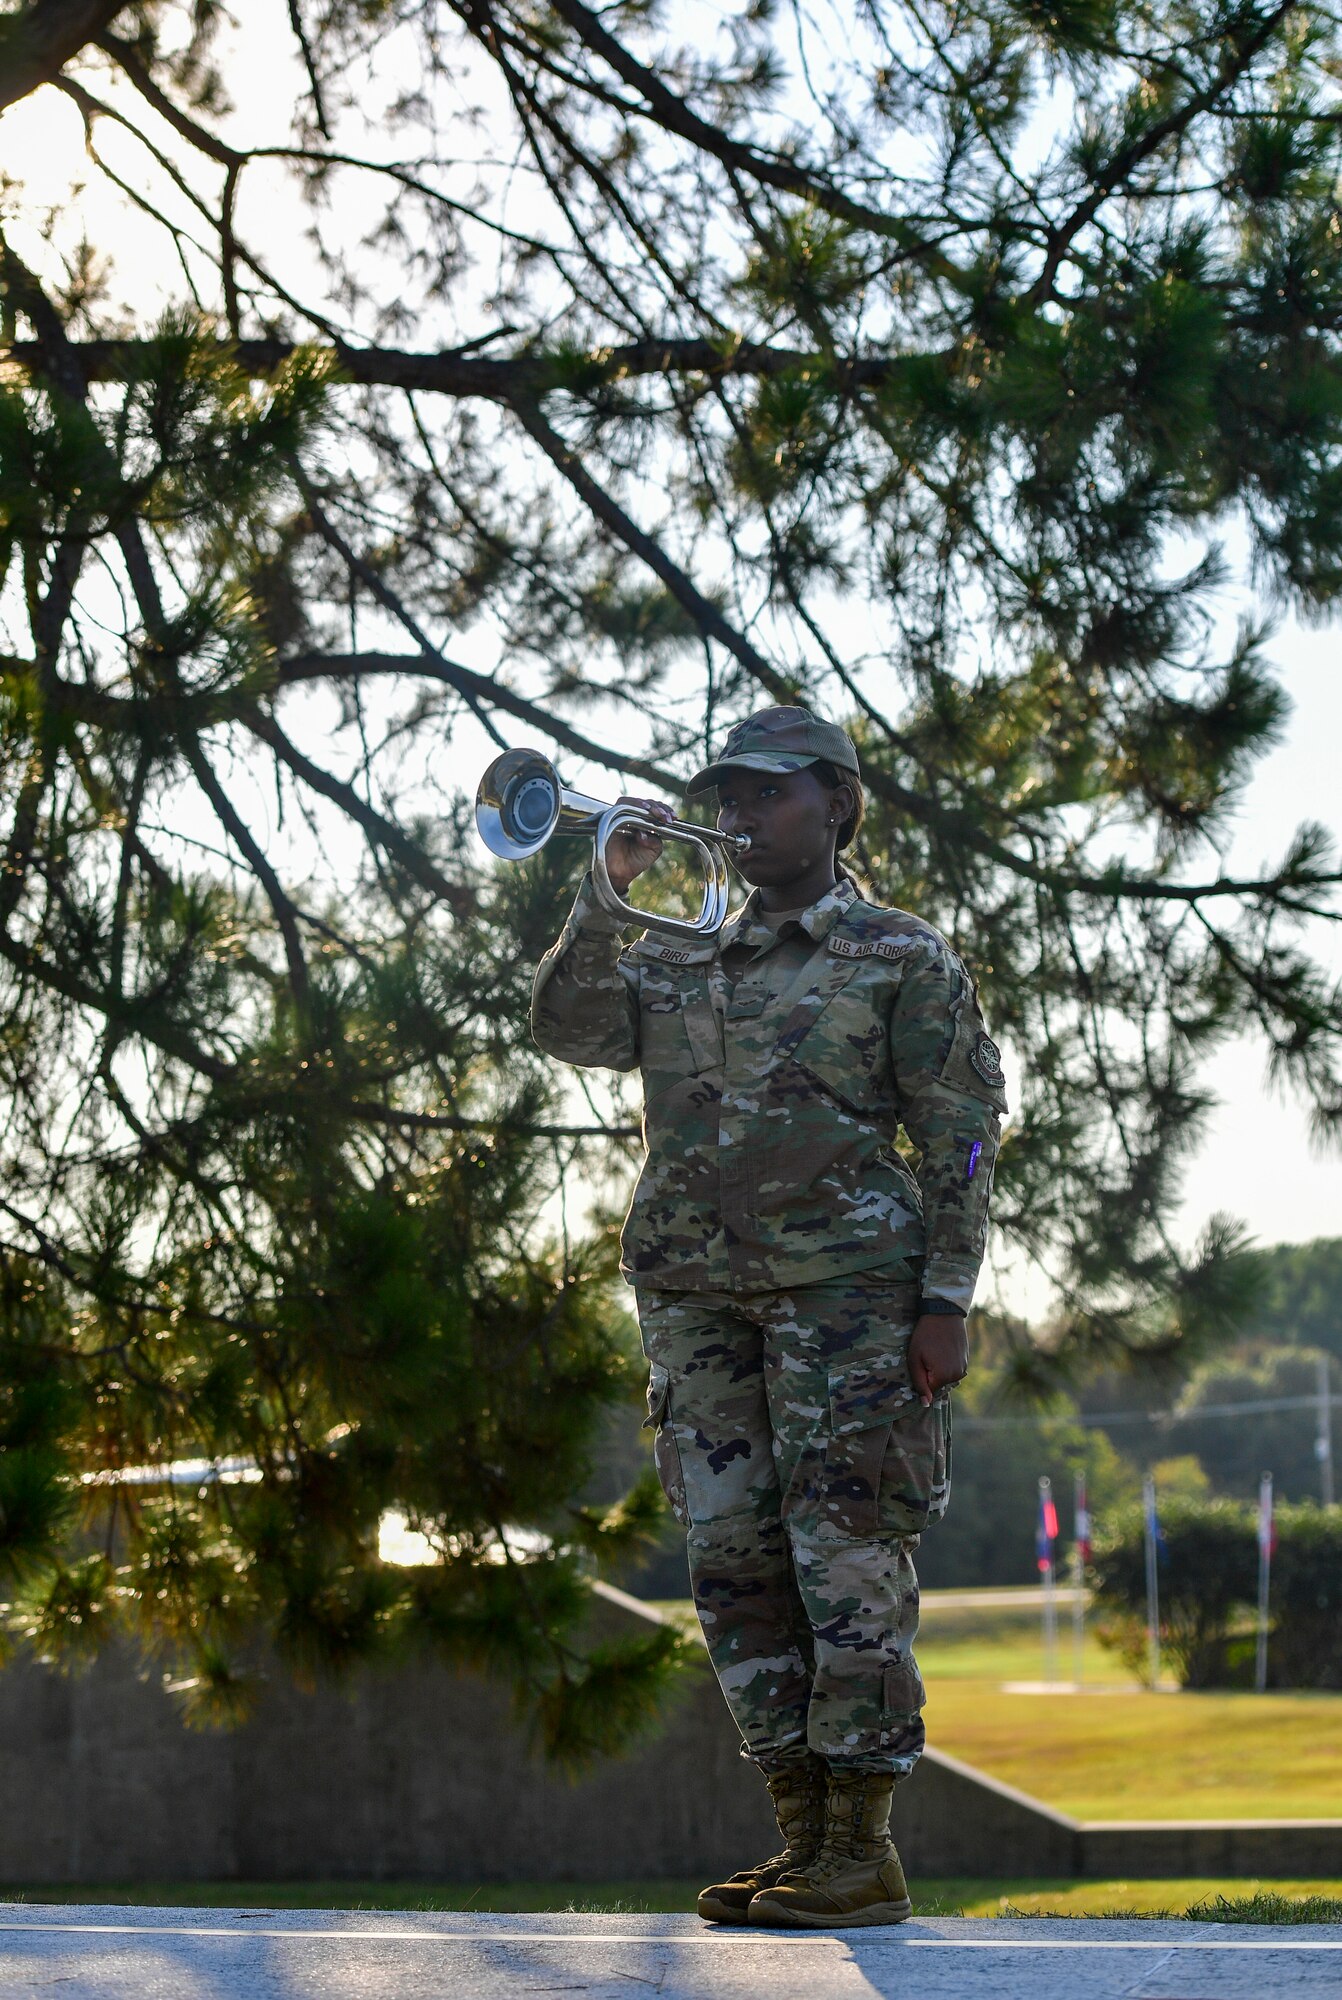 An Airman plays Taps on a bugle